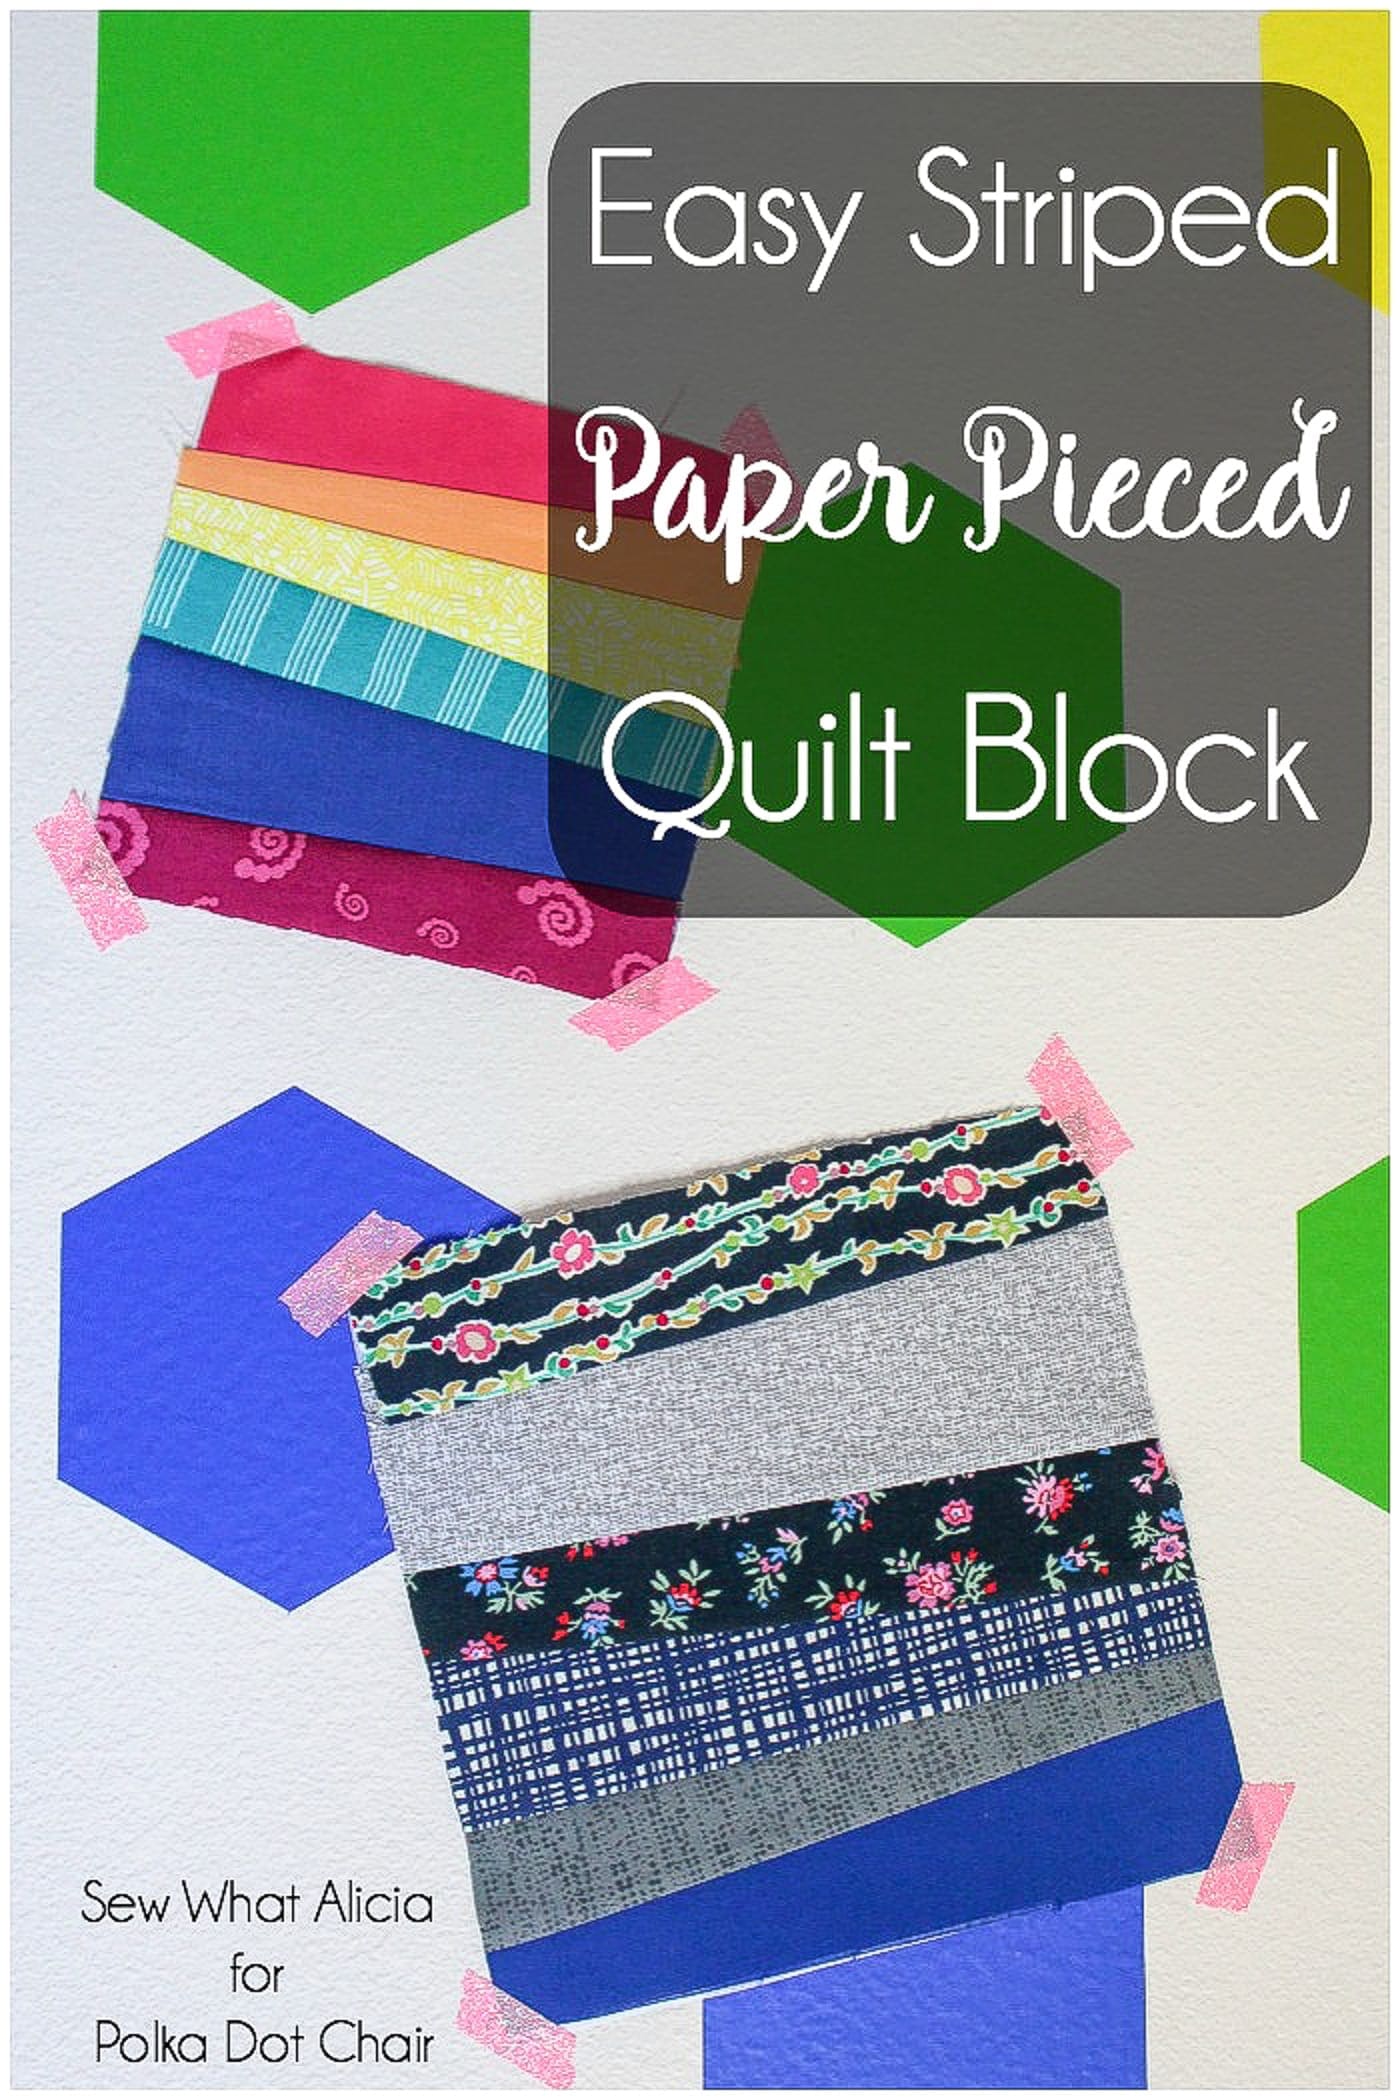 Easy Striped Paper Pieced Quilt Block Tutorial